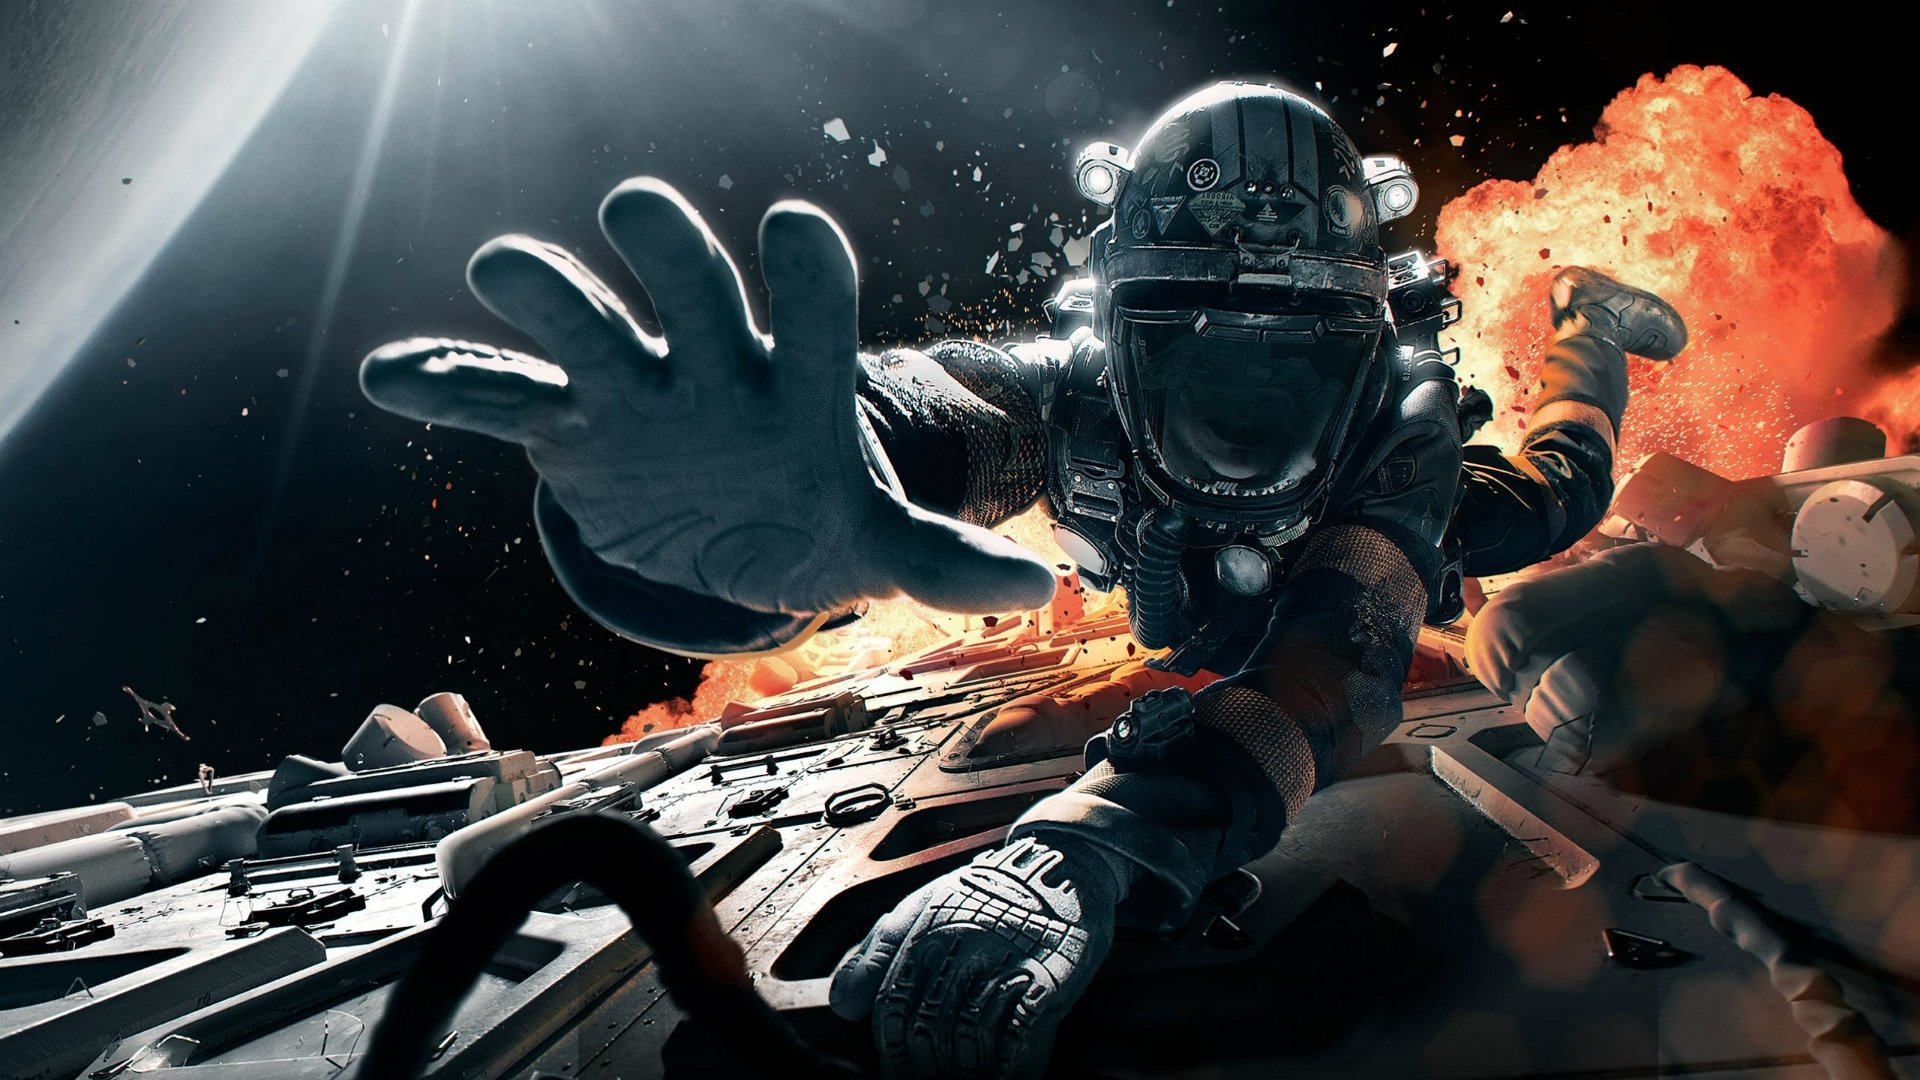 60+ The Expanse HD Wallpapers and Backgrounds